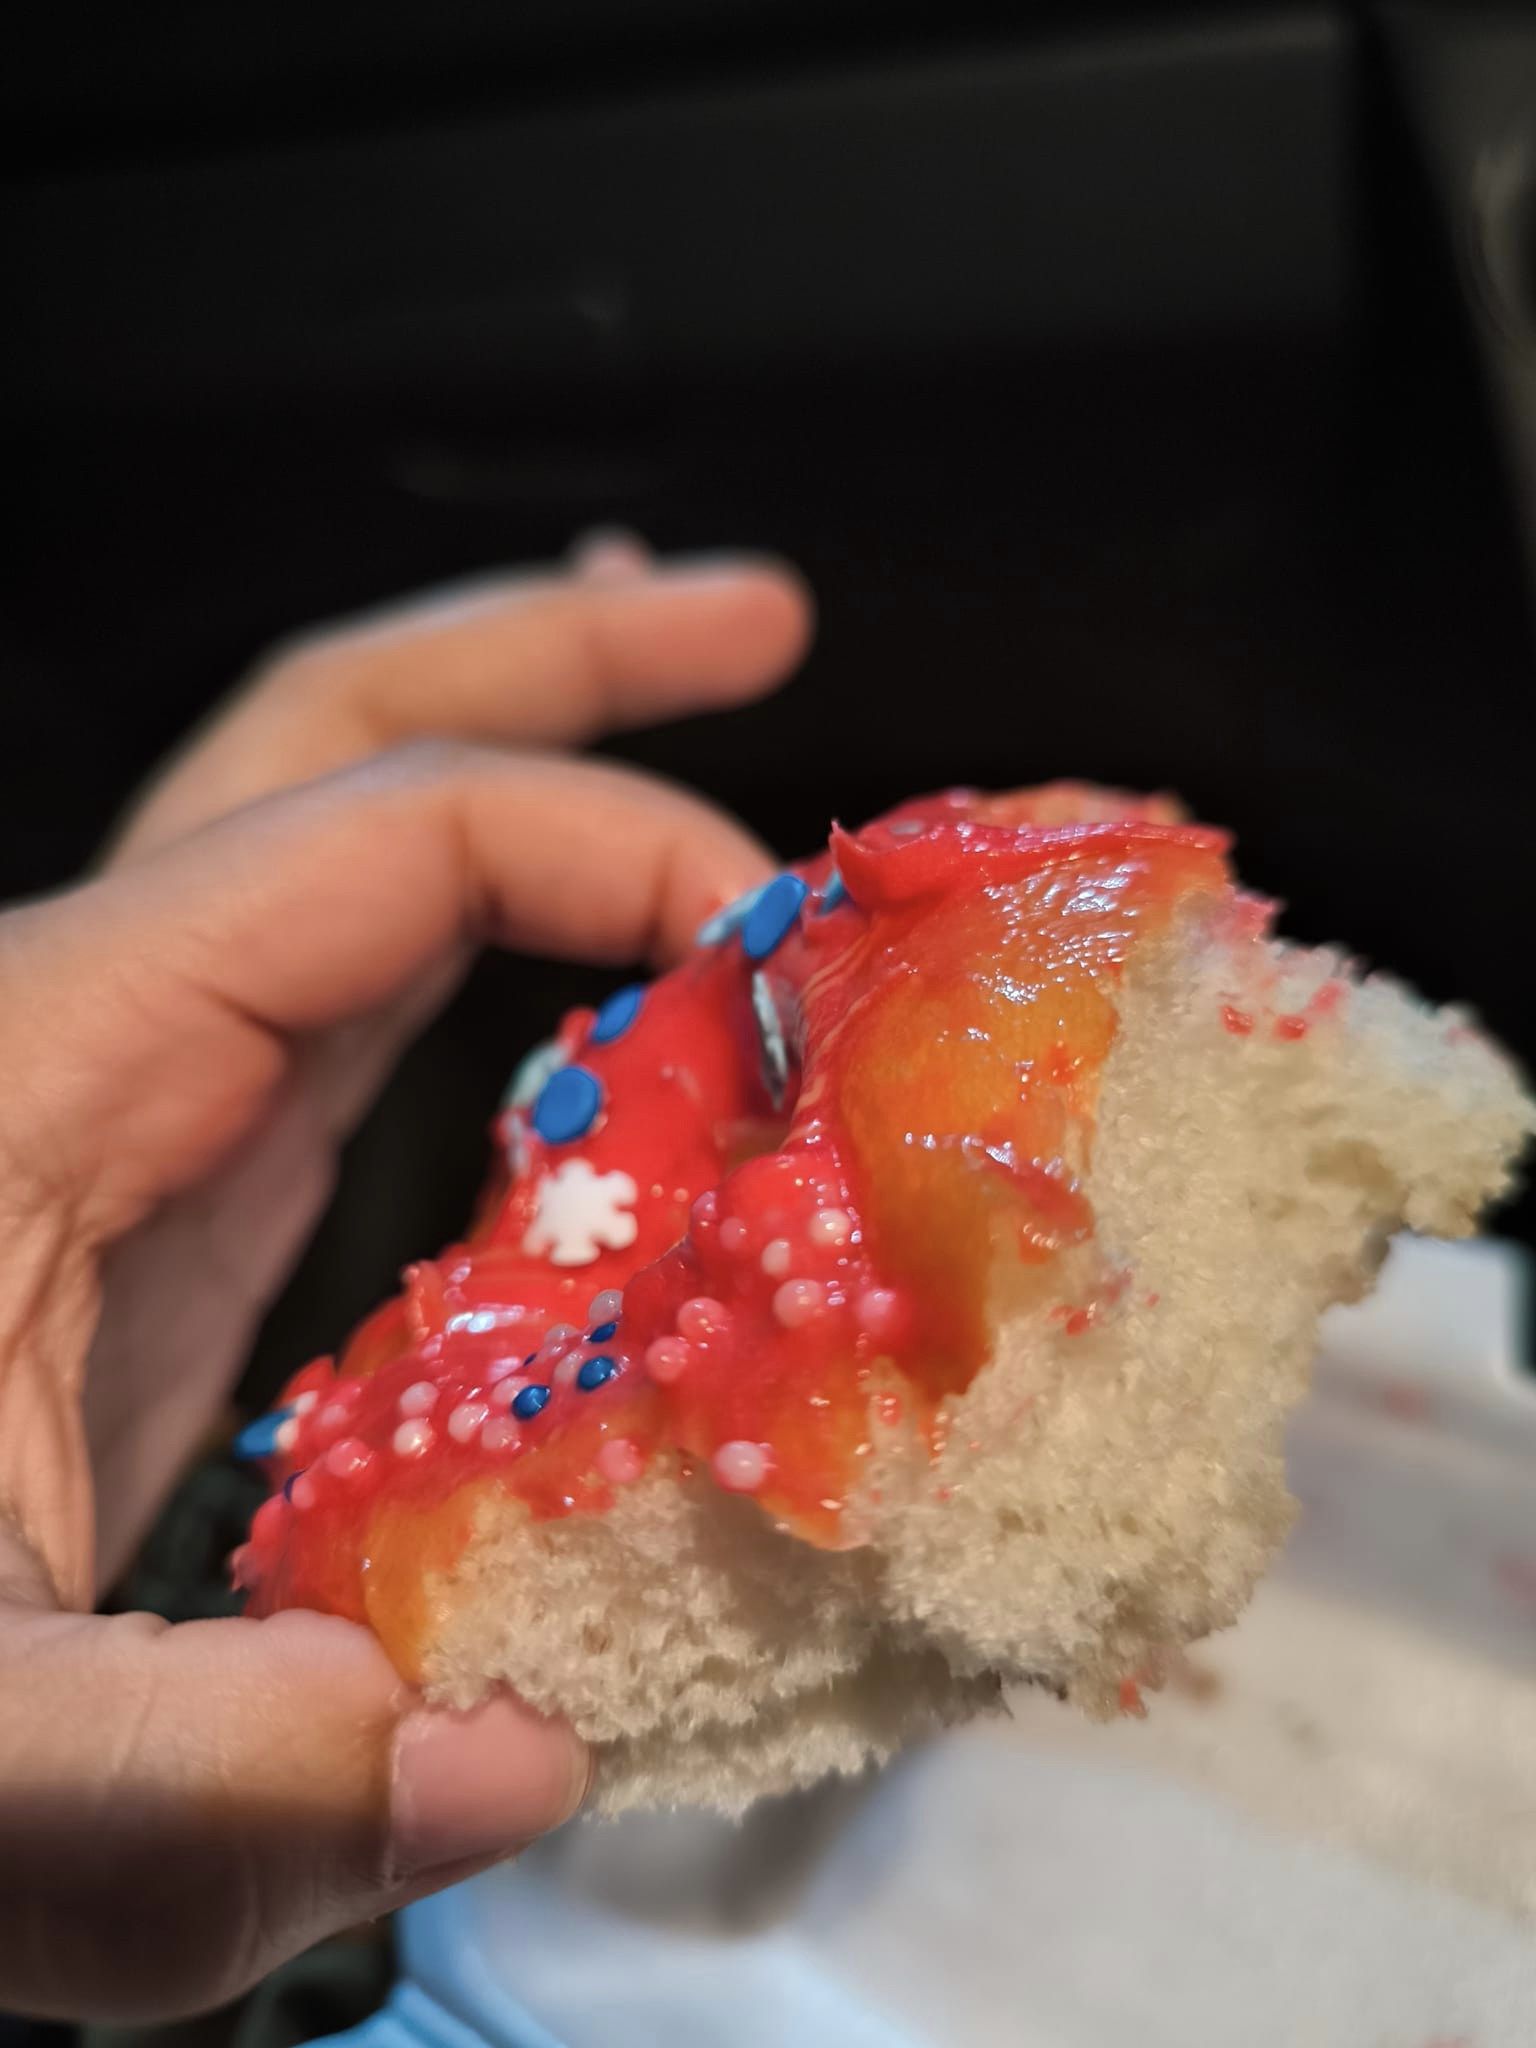 Close up photo of donut which is actually burger bun with a hole